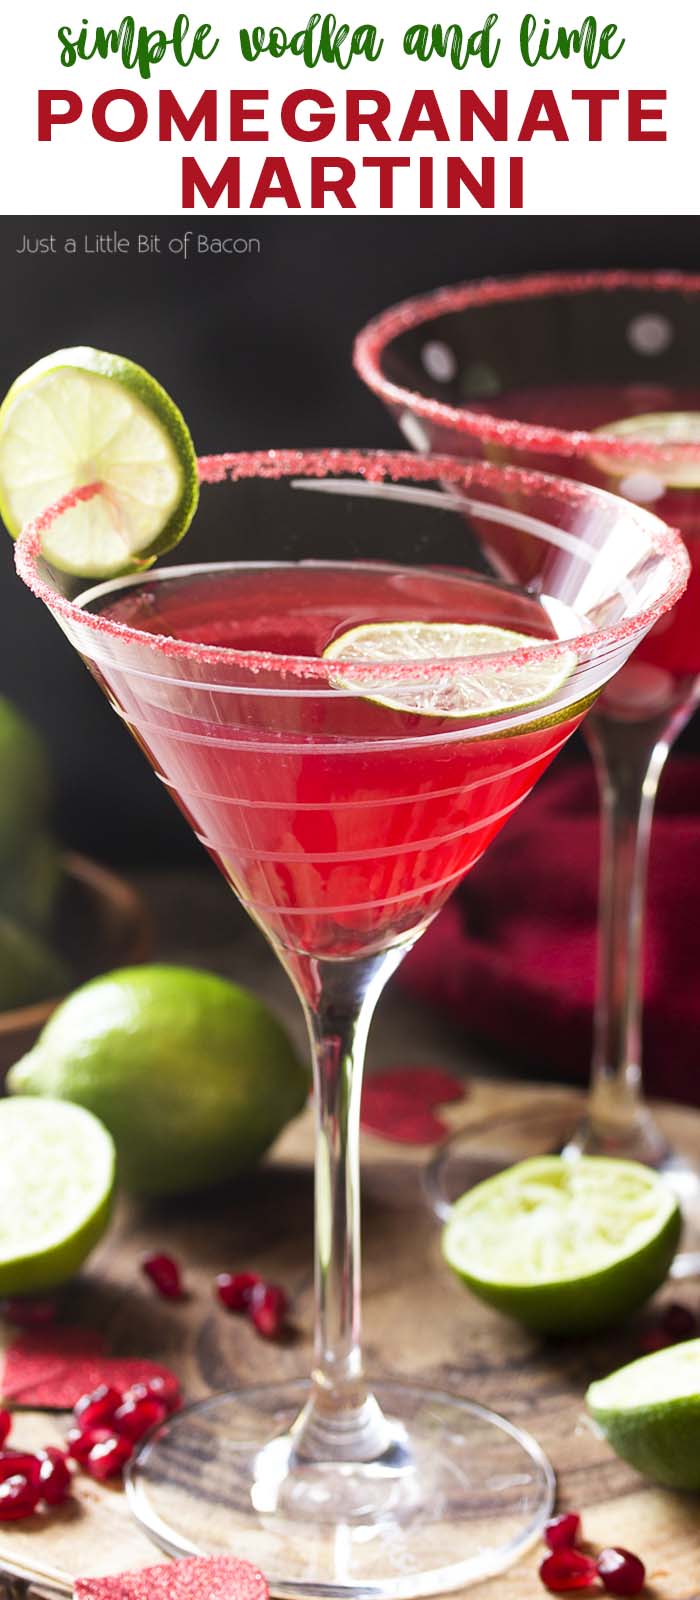 Two pink drinks in martini glasses with text overlay - Pomegranate Martini.